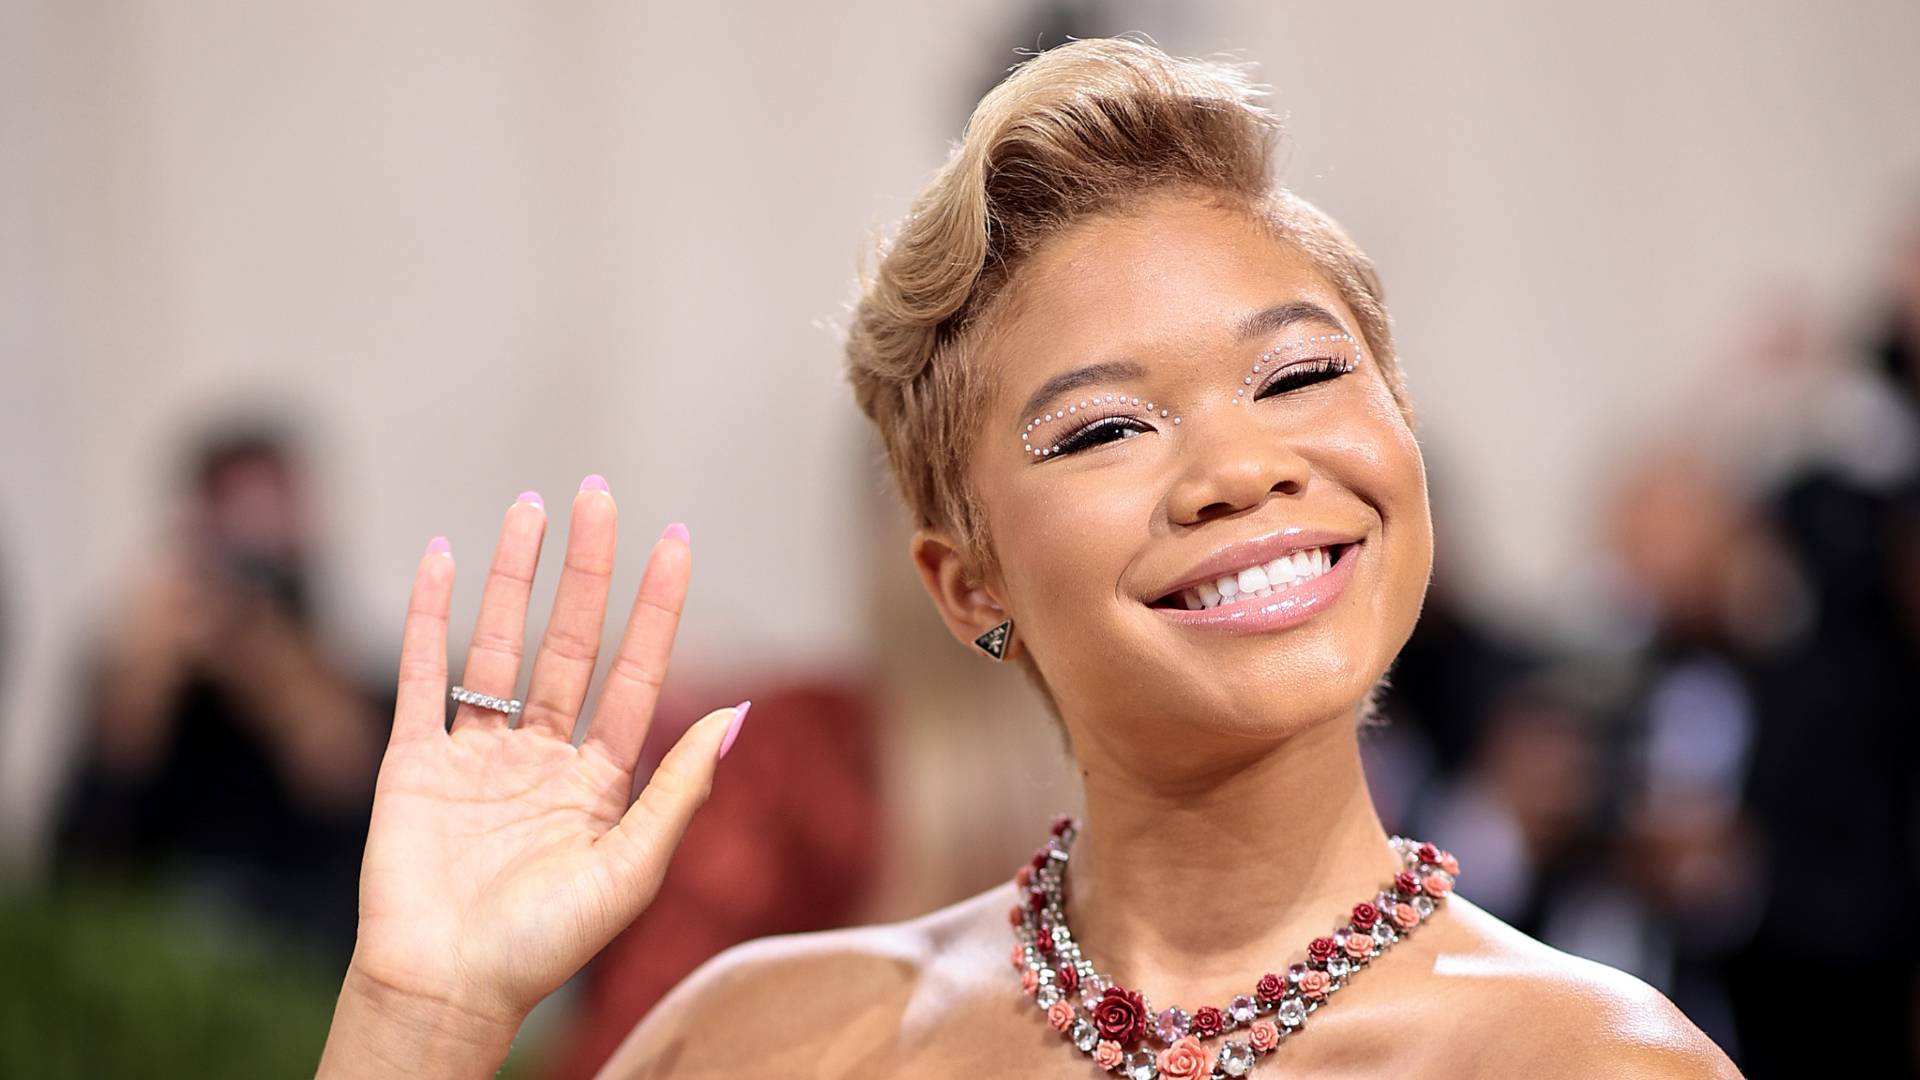 Storm Reid attends The 2021 Met Gala Celebrating In America: A Lexicon Of Fashion at Metropolitan Museum of Art on September 13, 2021 in New York City.